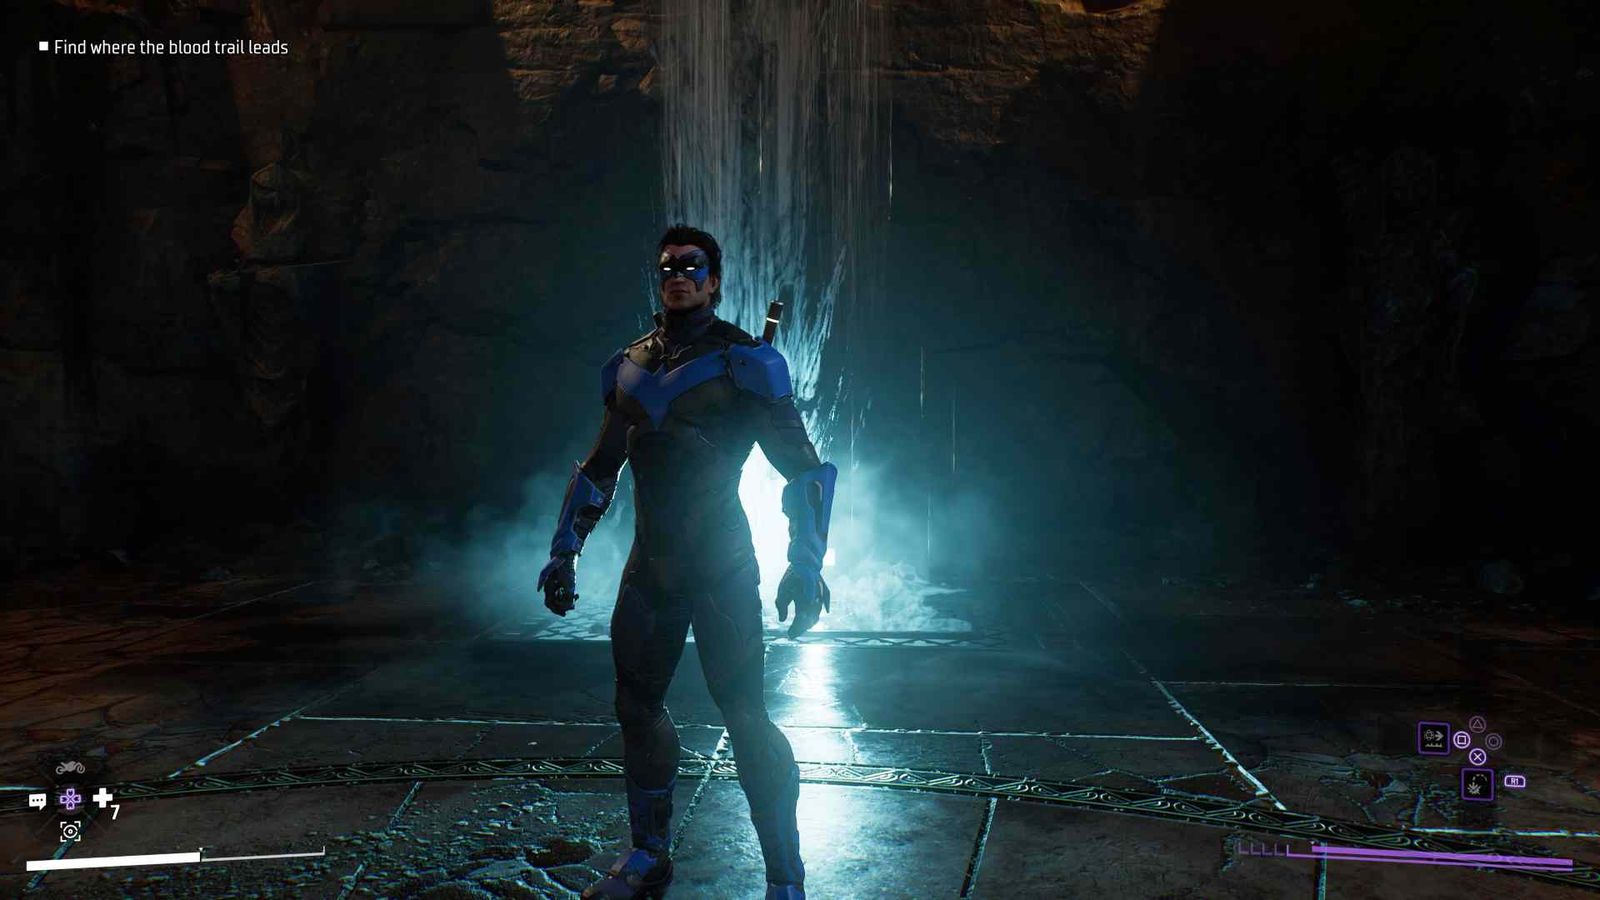 Nightwing standing in an illuminated cave in Gotham Knights.